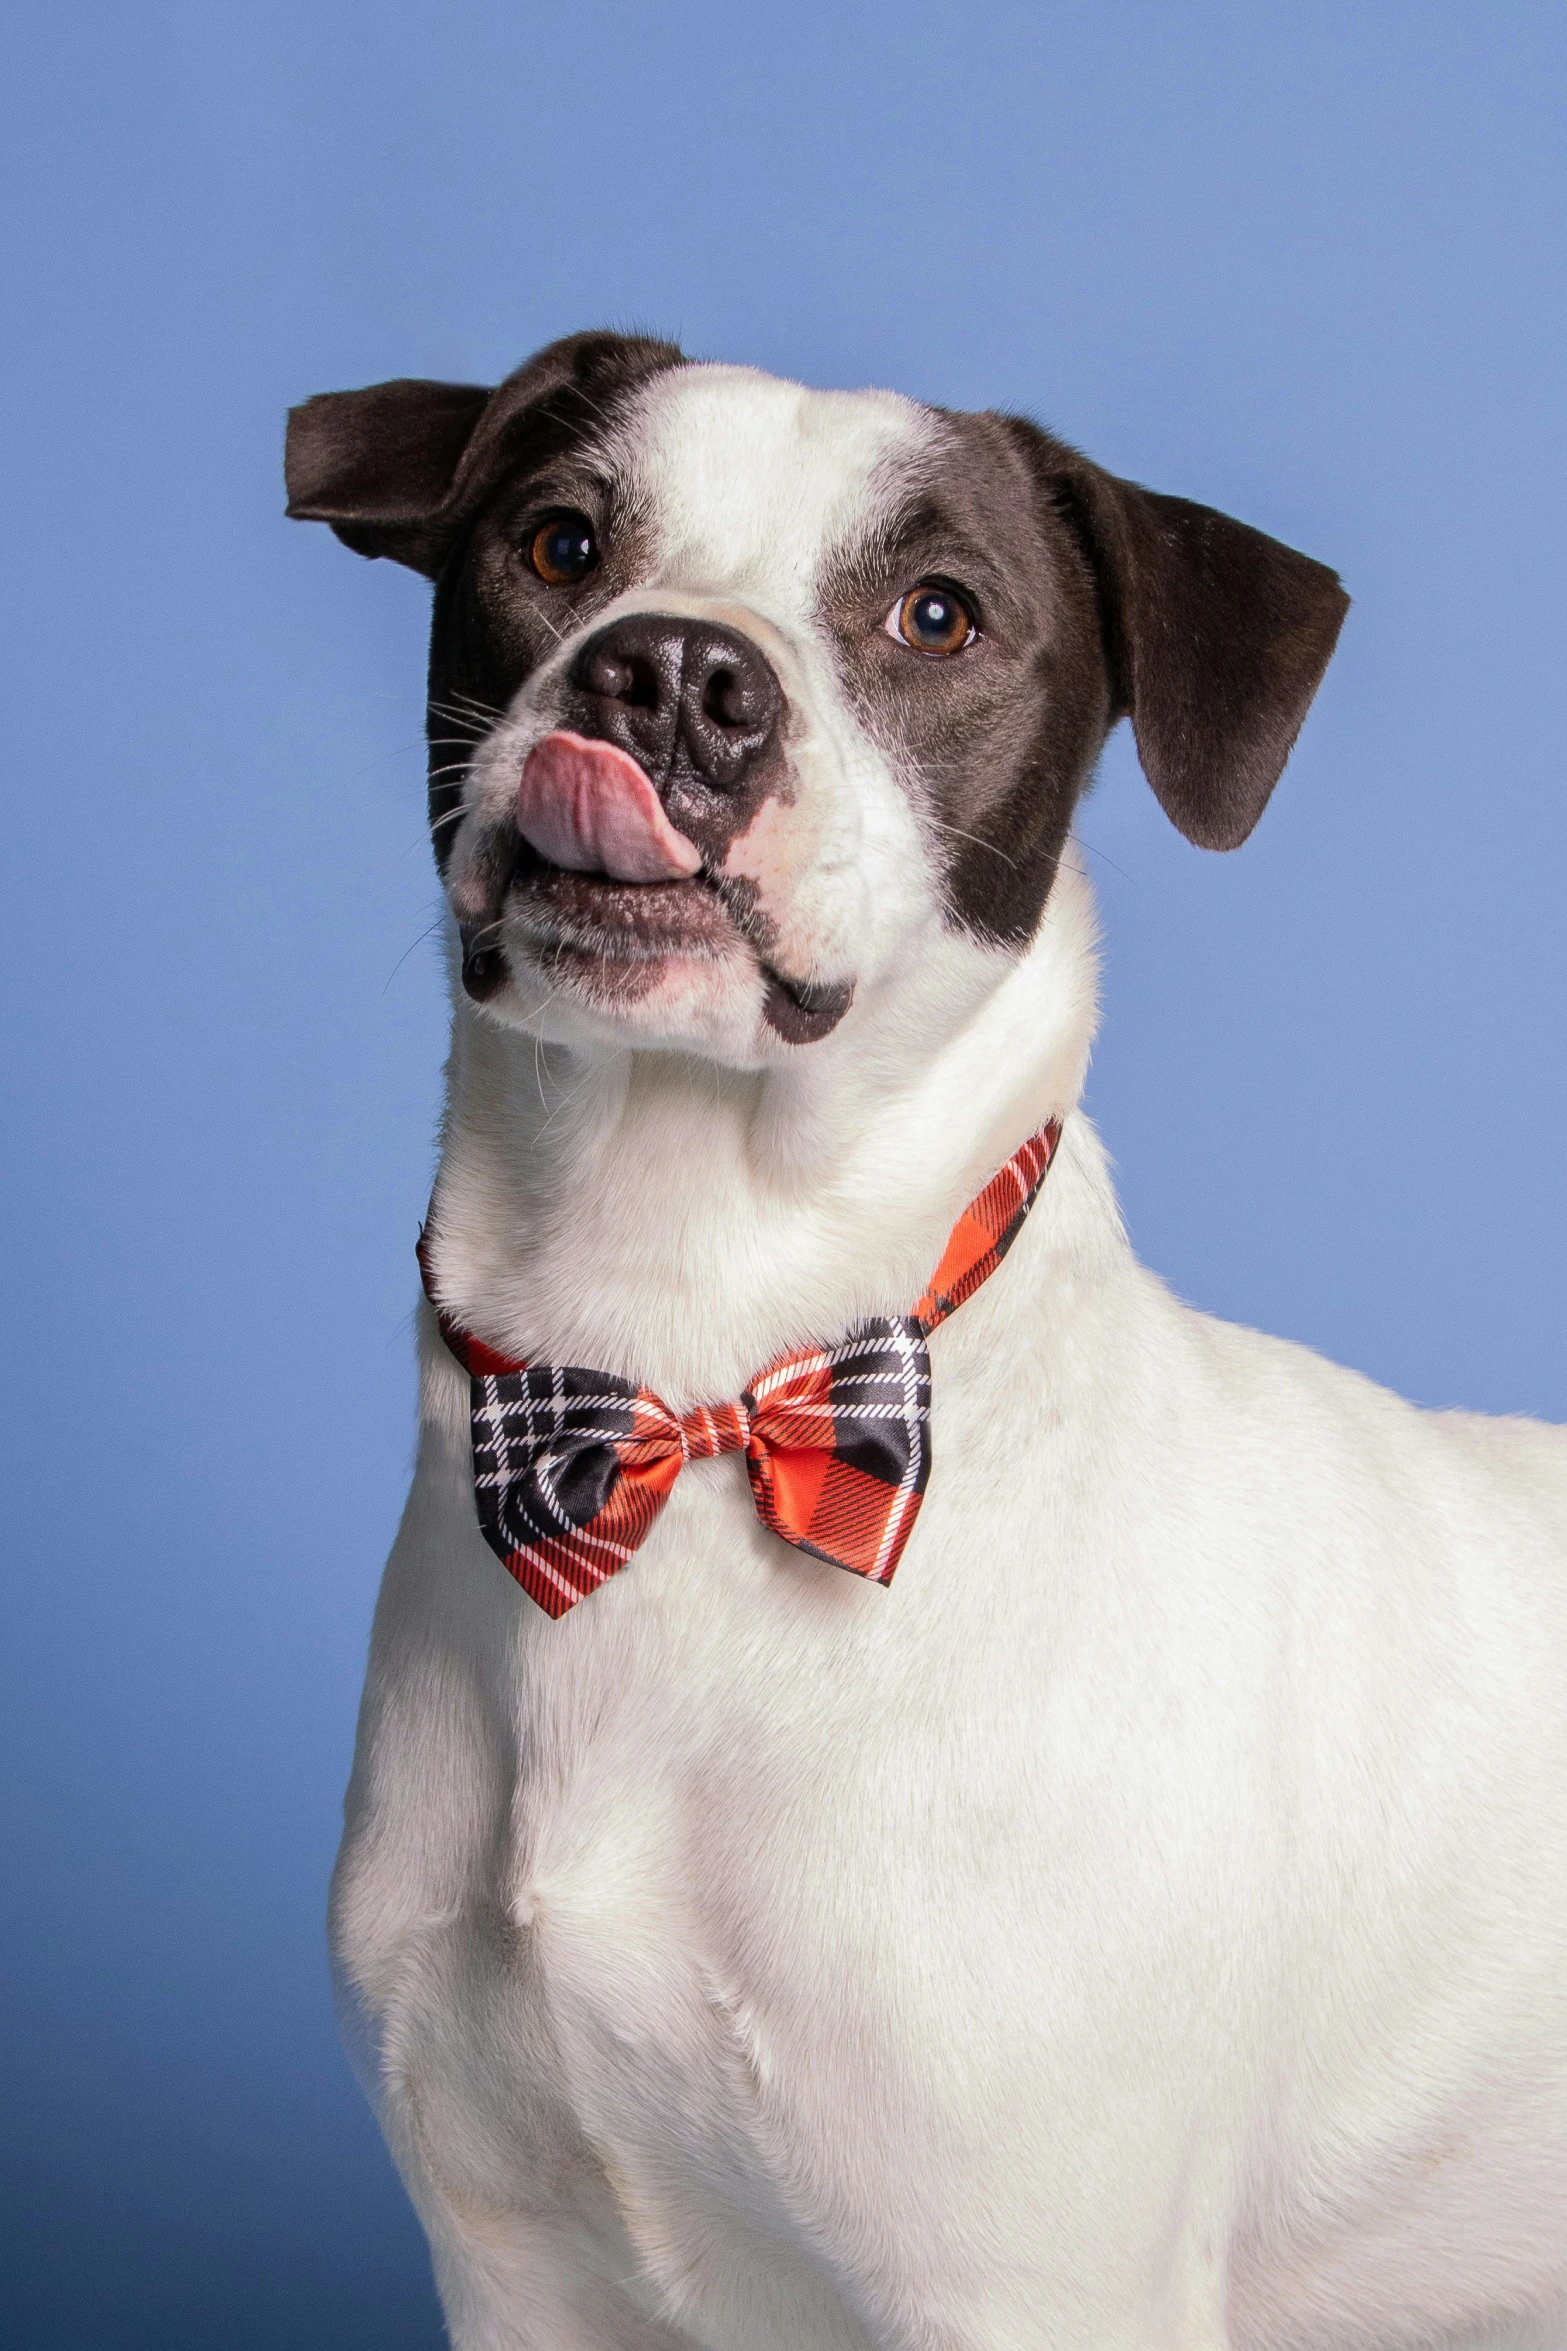 a close - up of a small dog wearing a bow tie